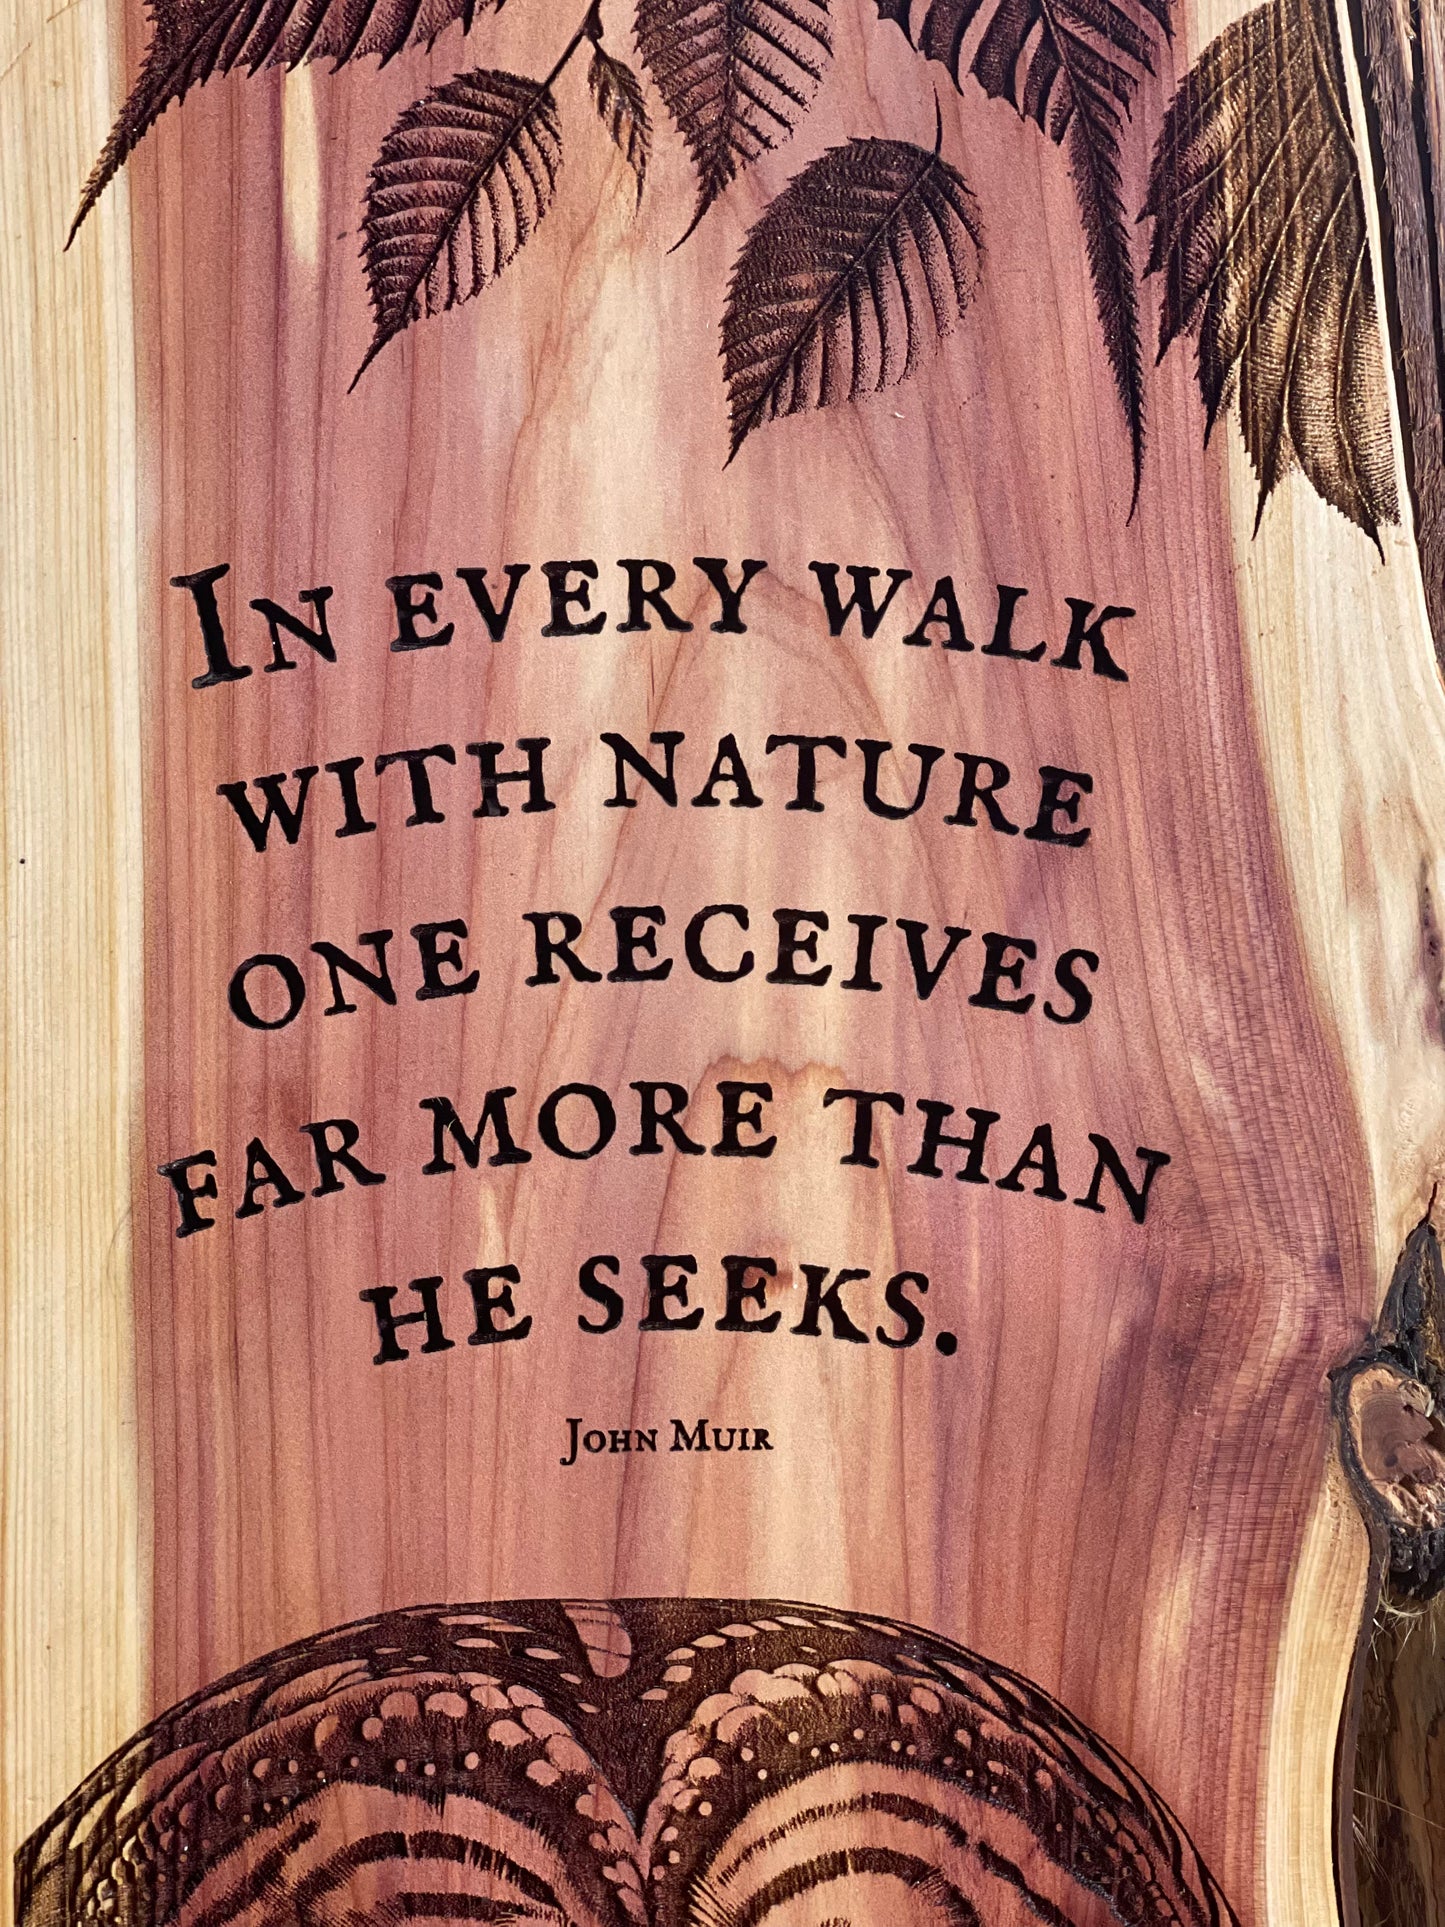 Walk with Nature: John Muir quote